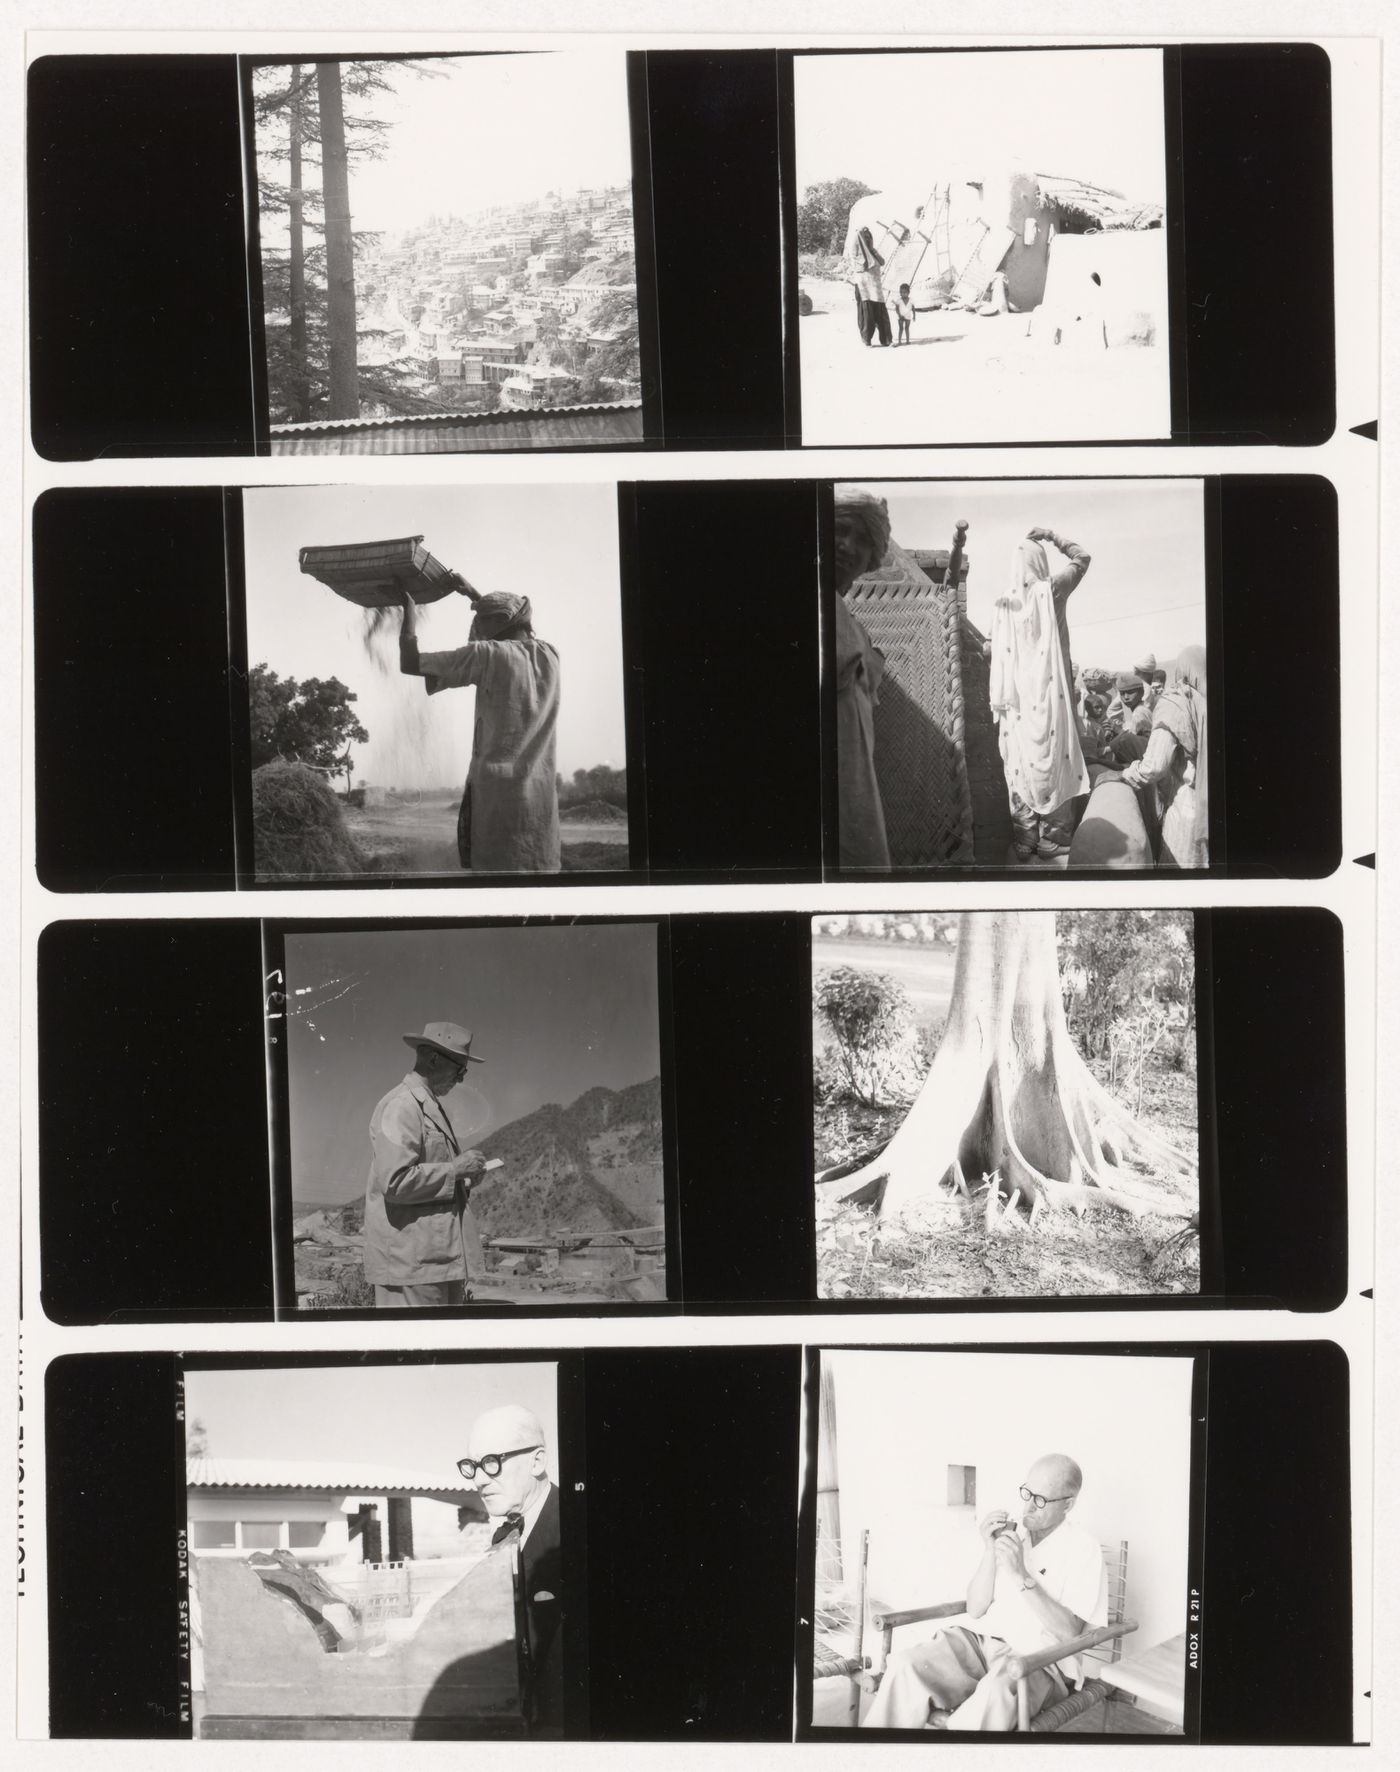 Contact sheet with views of Chandigarh's area before the construction and portraits of Le Corbusier and Pierre Jeanneret